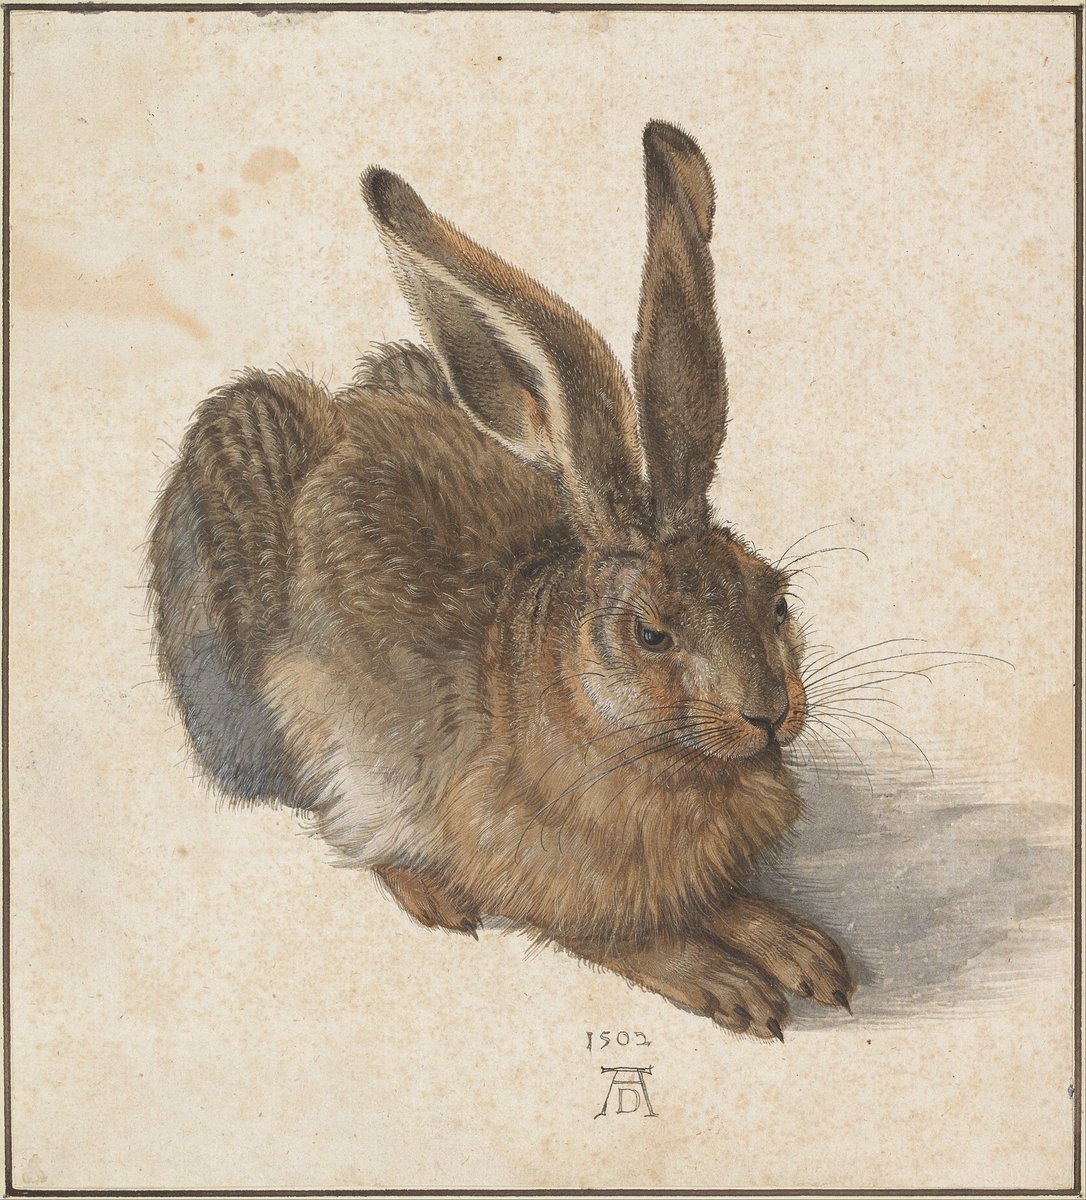 How did he manage that? Dürer was obviously an artist with extraordinary natural gifts, one who could render seemingly anything with the utmost precision and detail. Even something as simple as a hare: